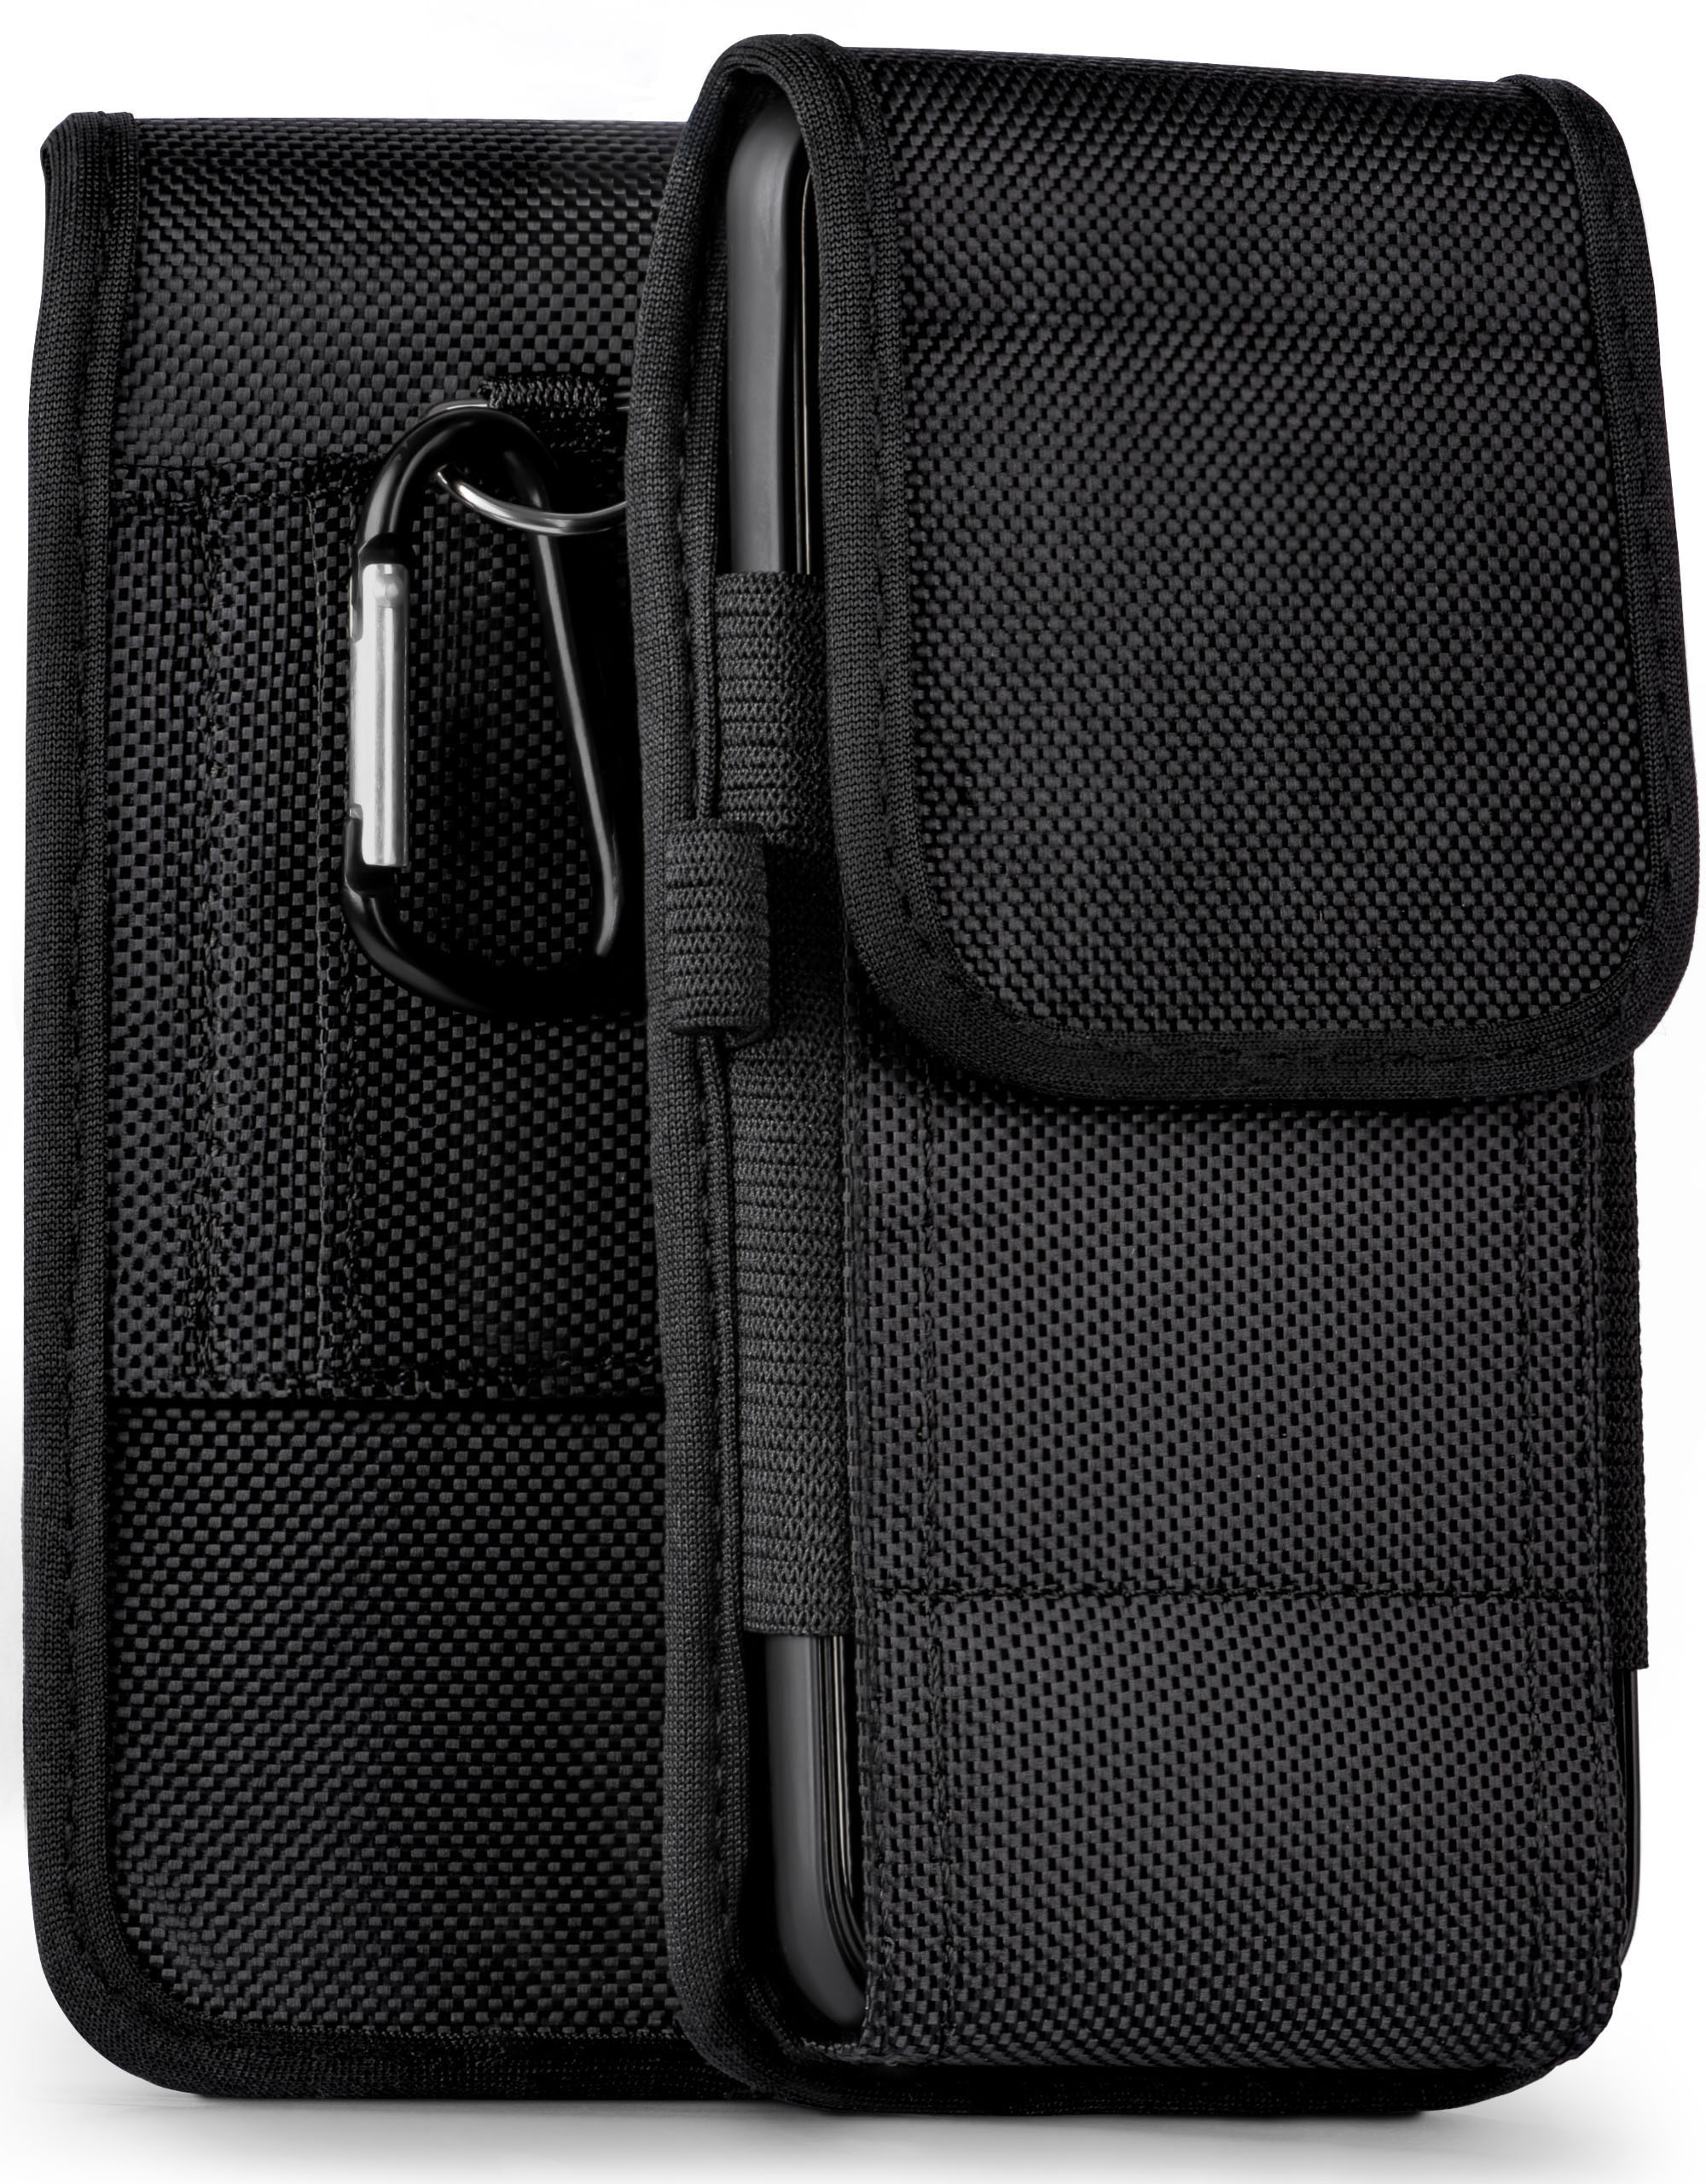 Trail Case, Holster, Cam, MOEX Agility LG, X